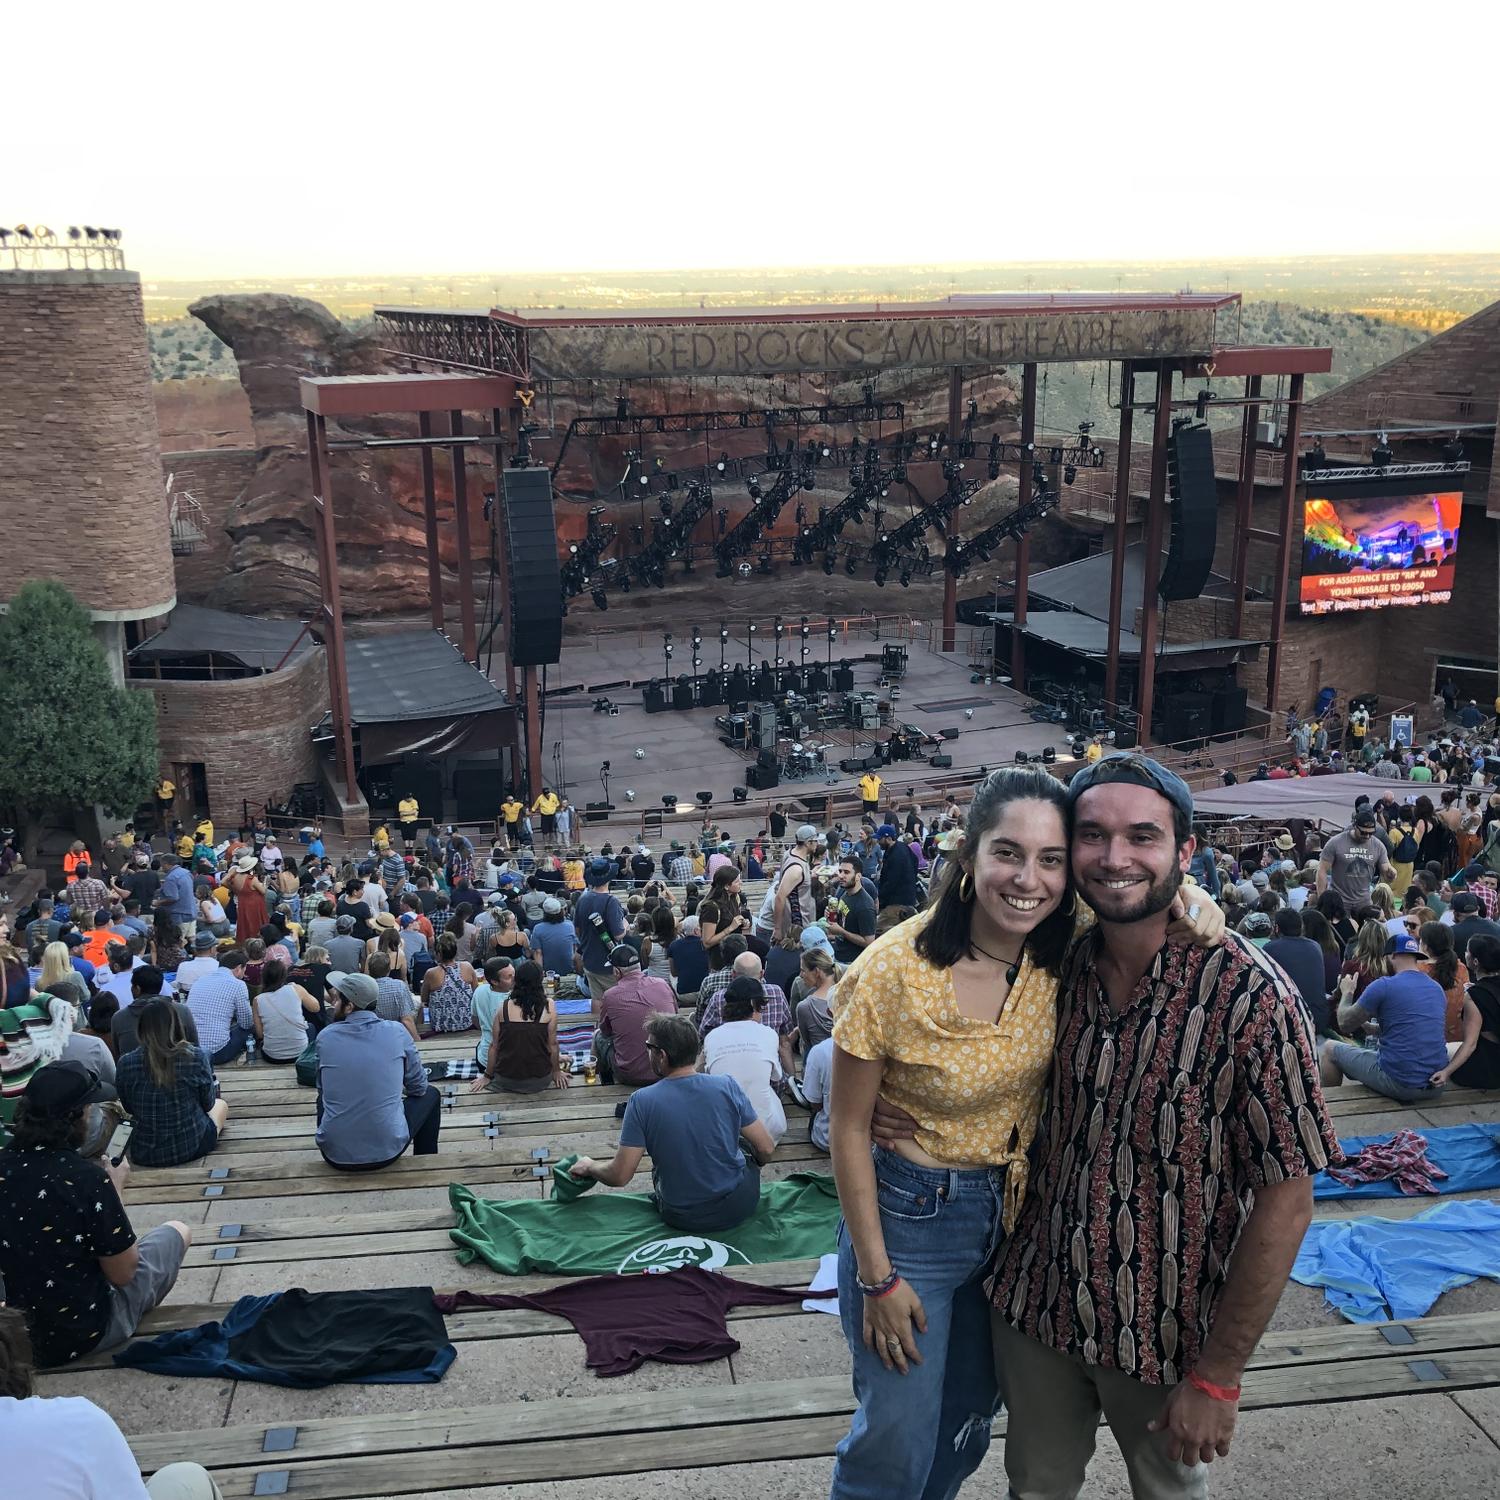 Our first Red Rocks show together.